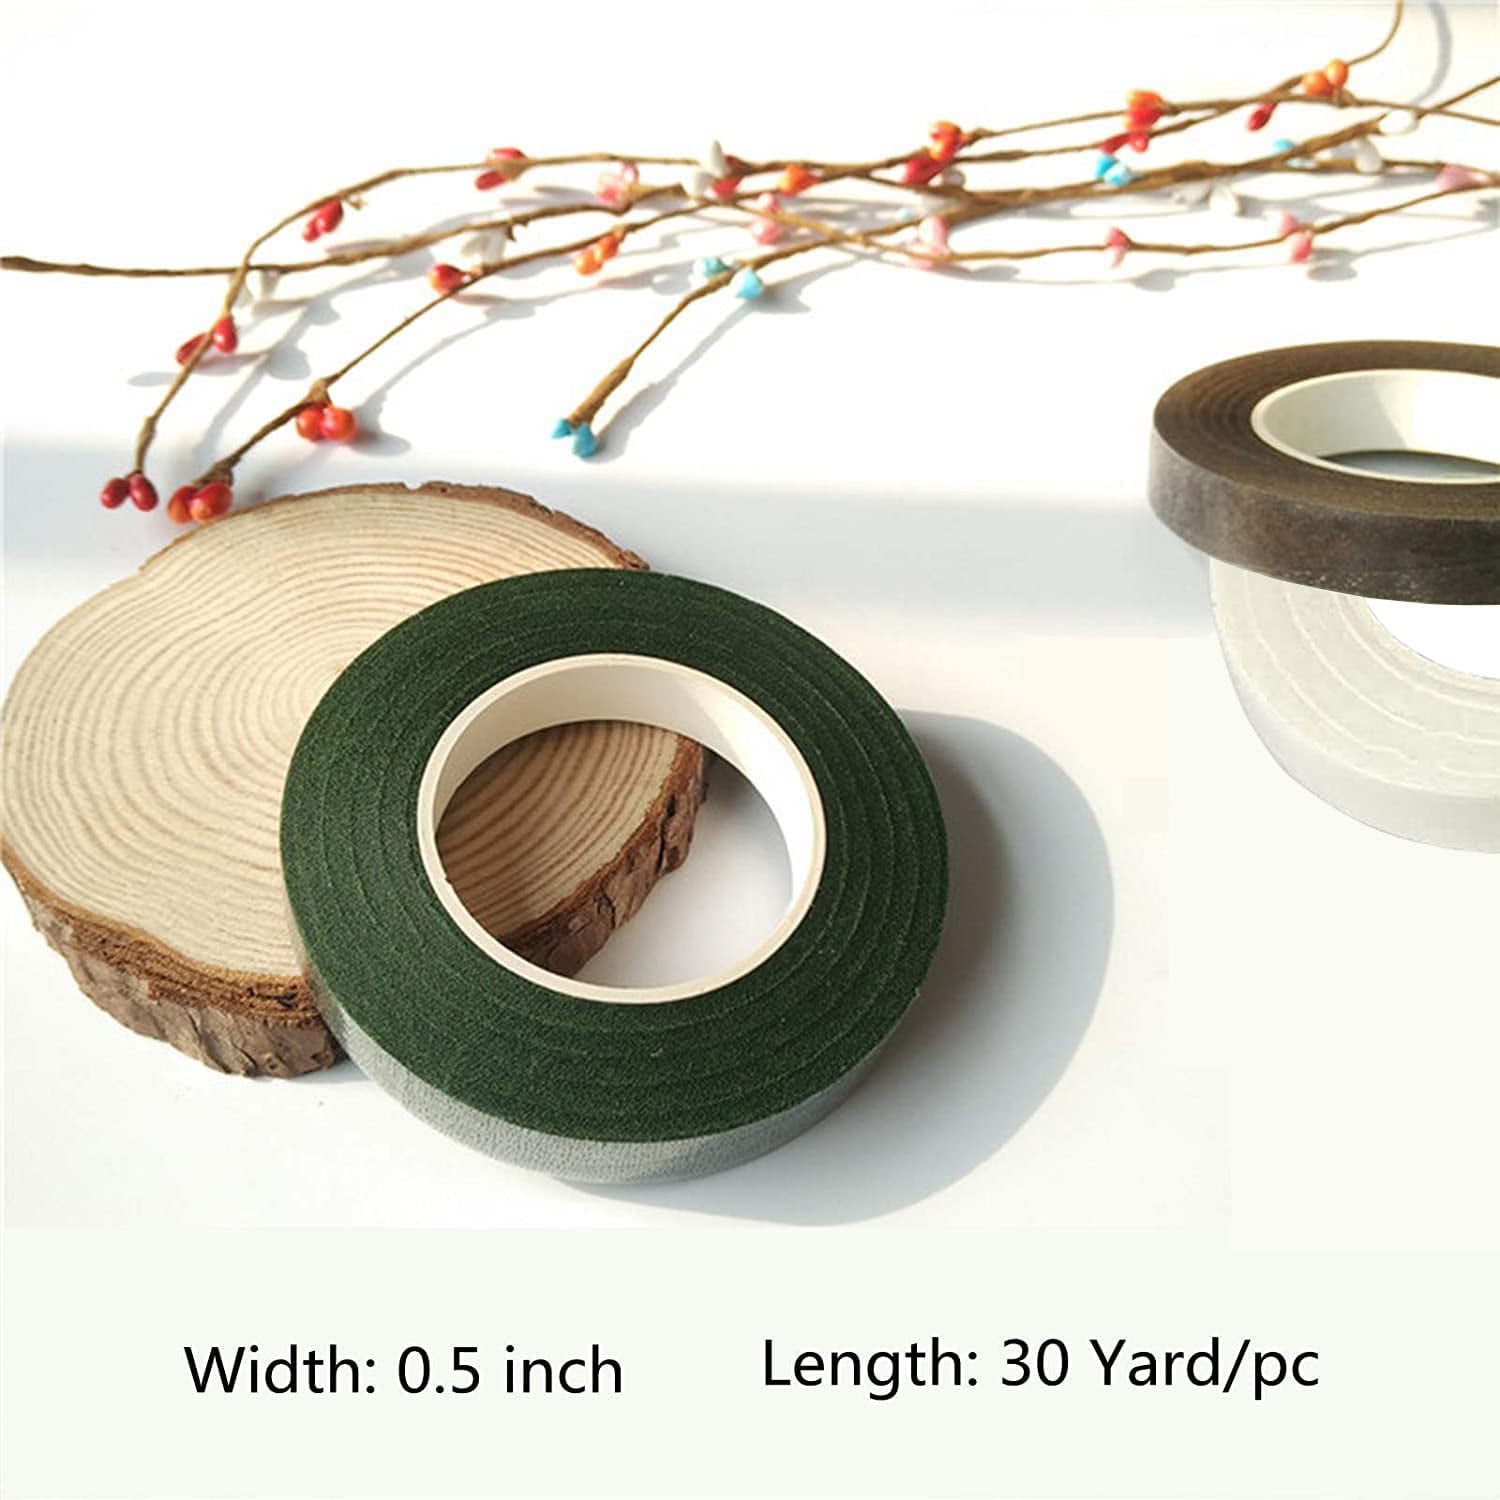 Bag of 25 Rolls of Naturally Rusted 20 Gauge Crafting Wire for Floral  Arranging, Crafting, Creating | 25 Spools of 30 Feet (750 Total Feet)